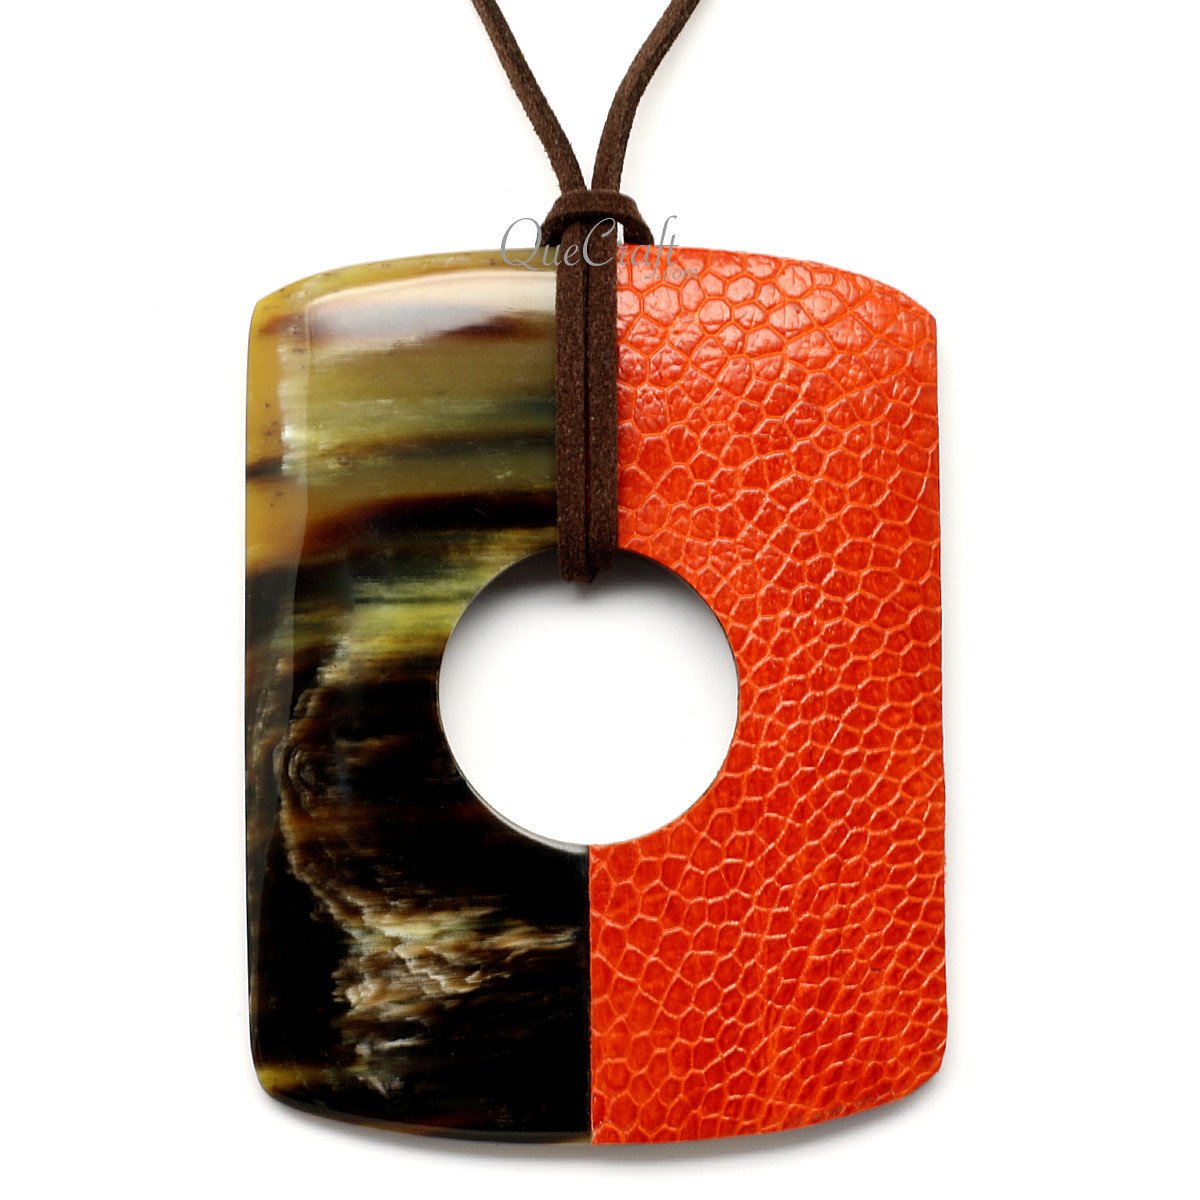 Horn & Leather Pendant #12517 - HORN JEWELRY